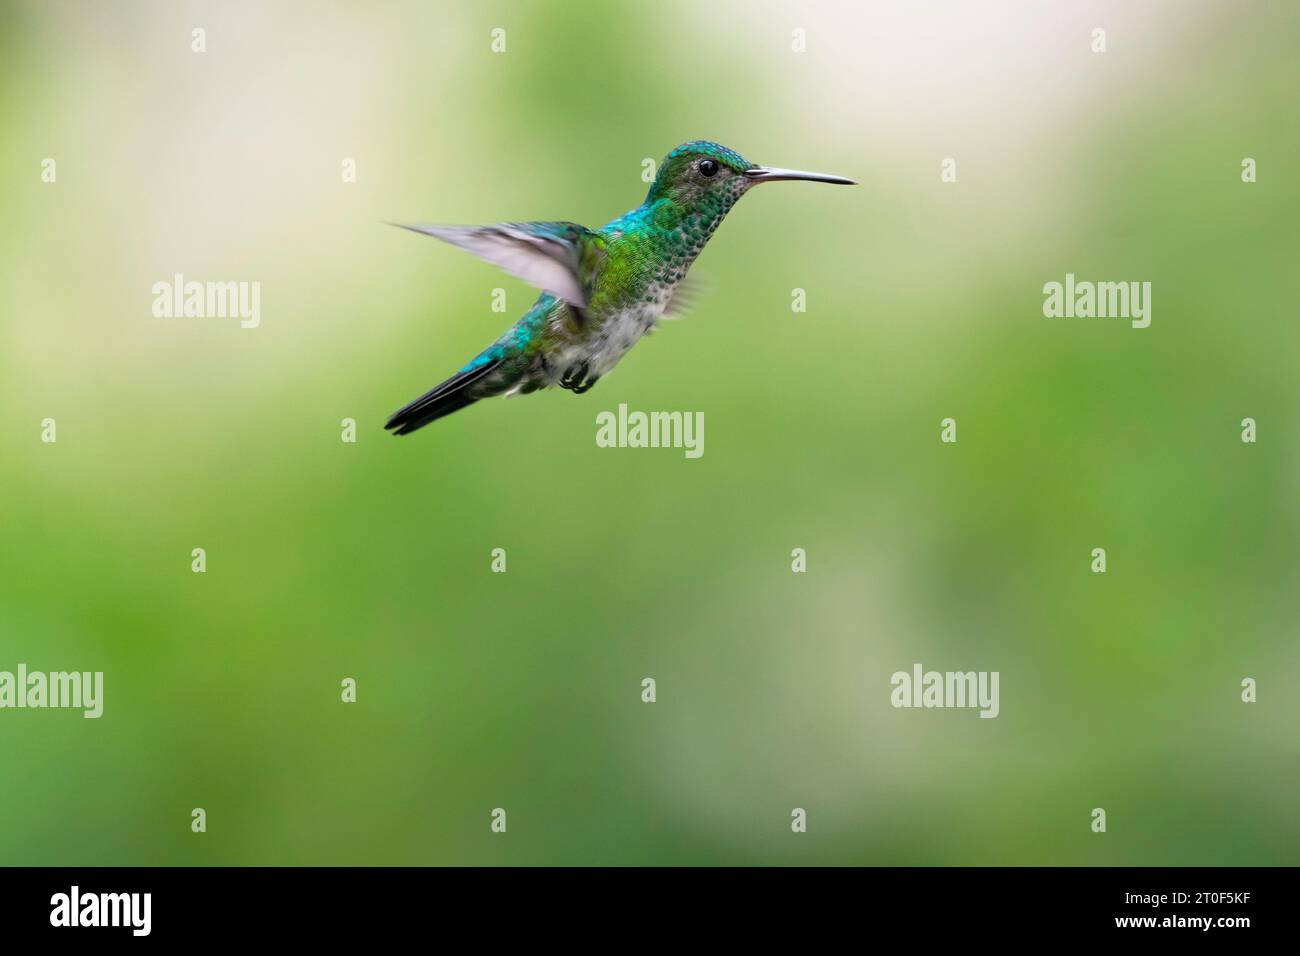 Beautiful Blue-chinned Sapphire hummingbird, Chlorestes notata, flying in the air with blurred green background Stock Photo